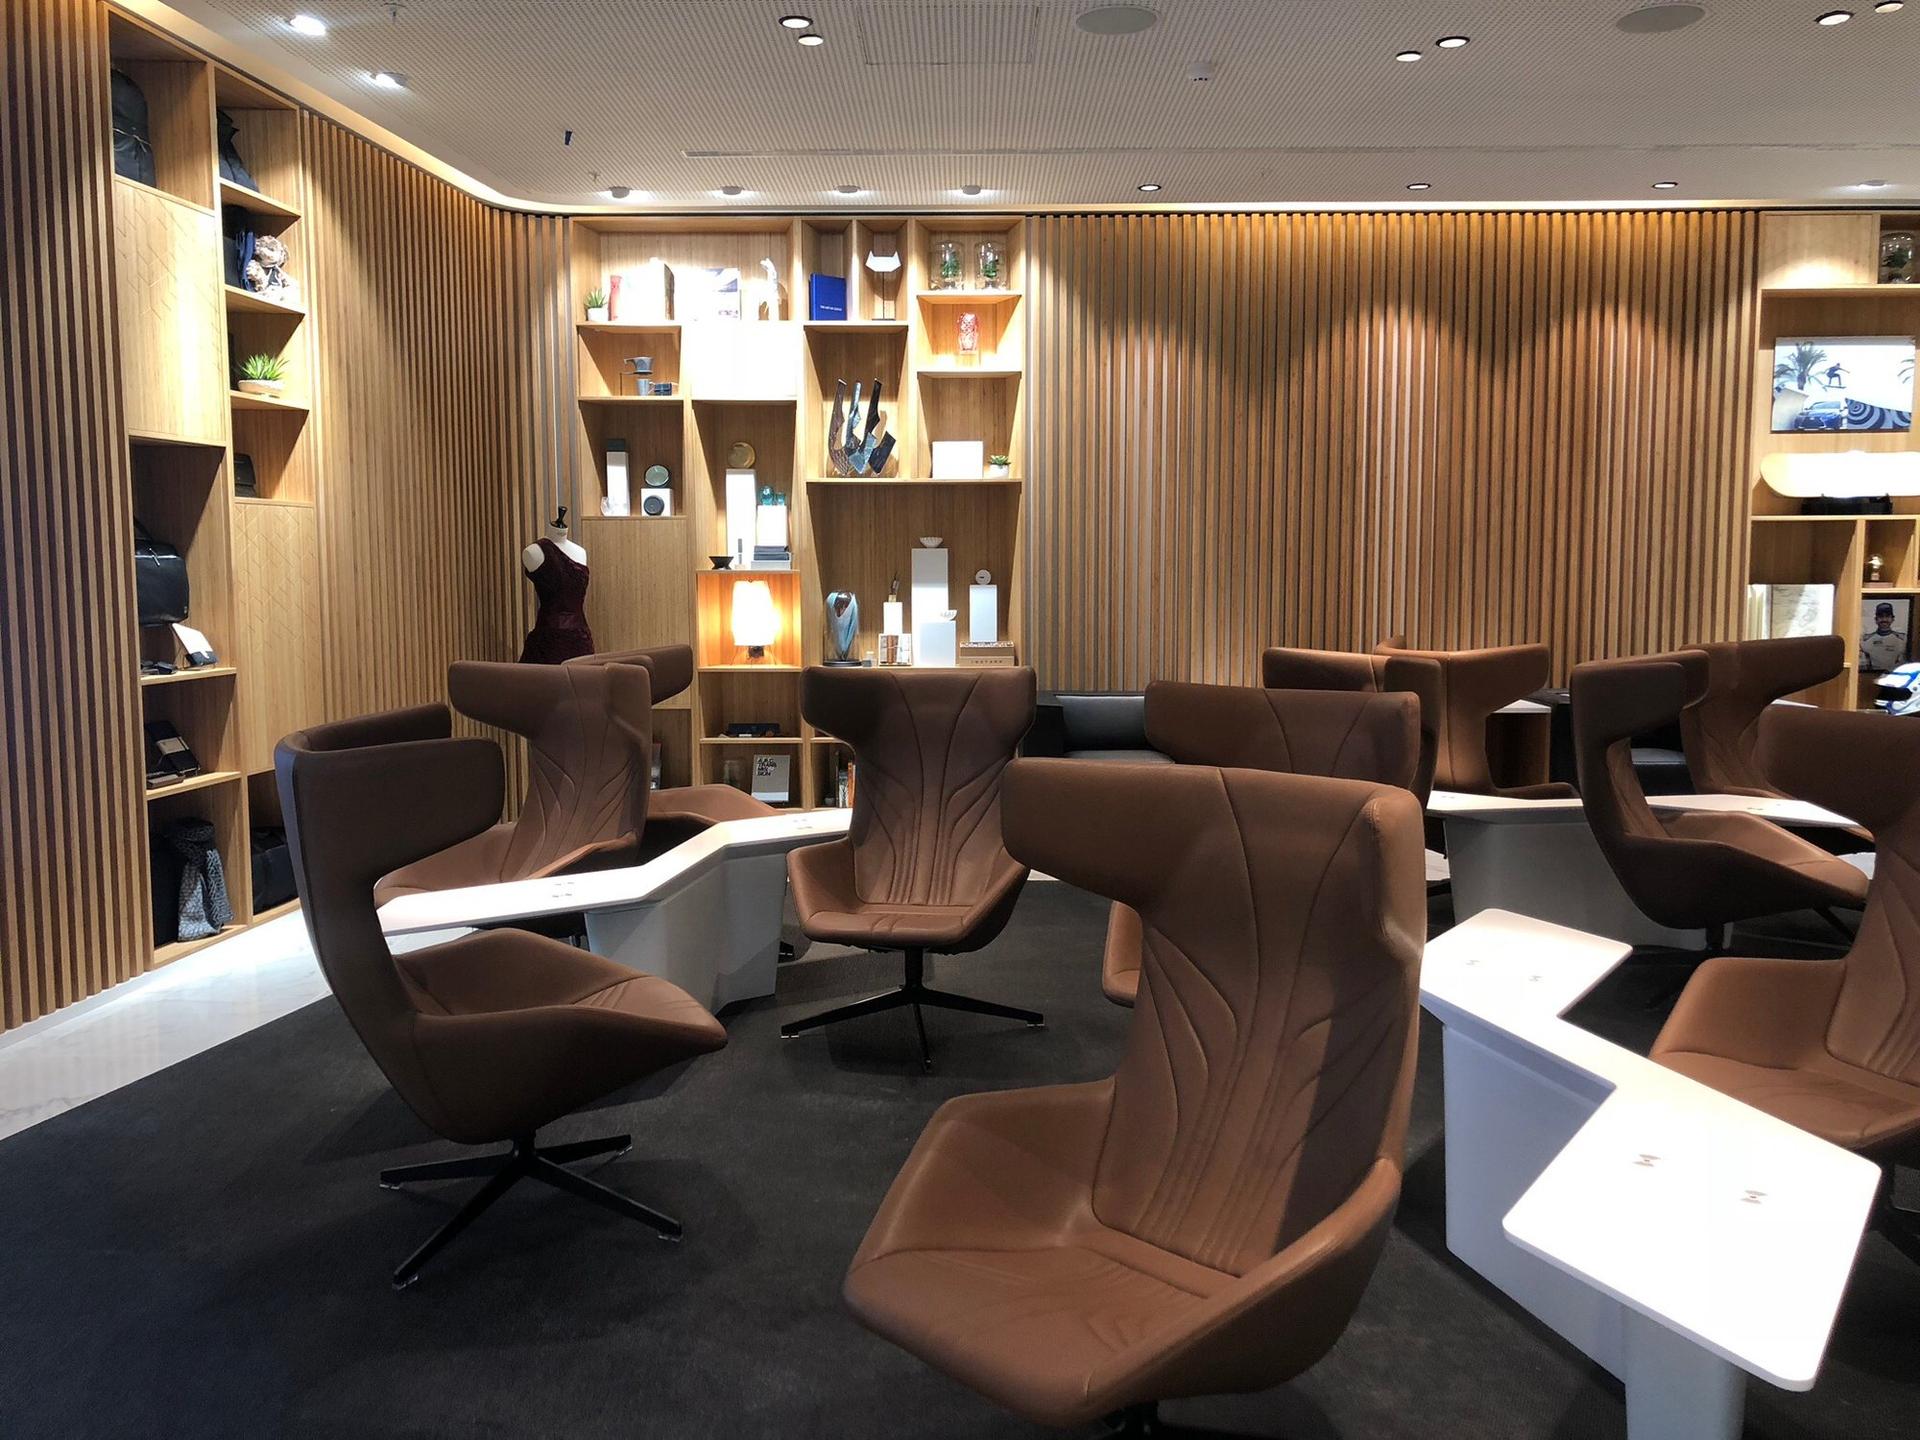 The Loft by Brussels Airlines and Lounge by Lexus image 13 of 23